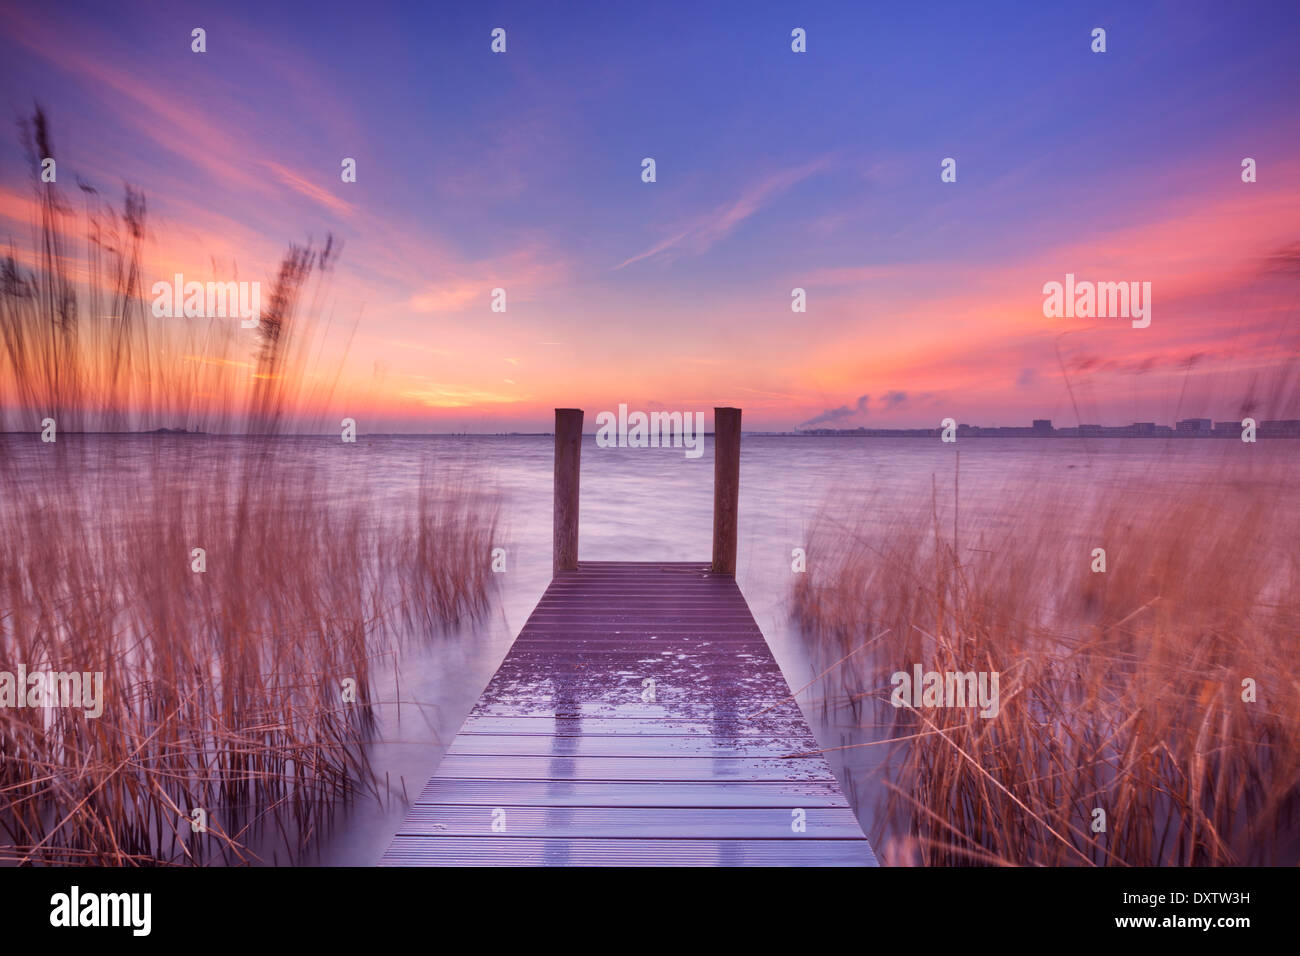 A small jetty on a lake at dawn Stock Photo